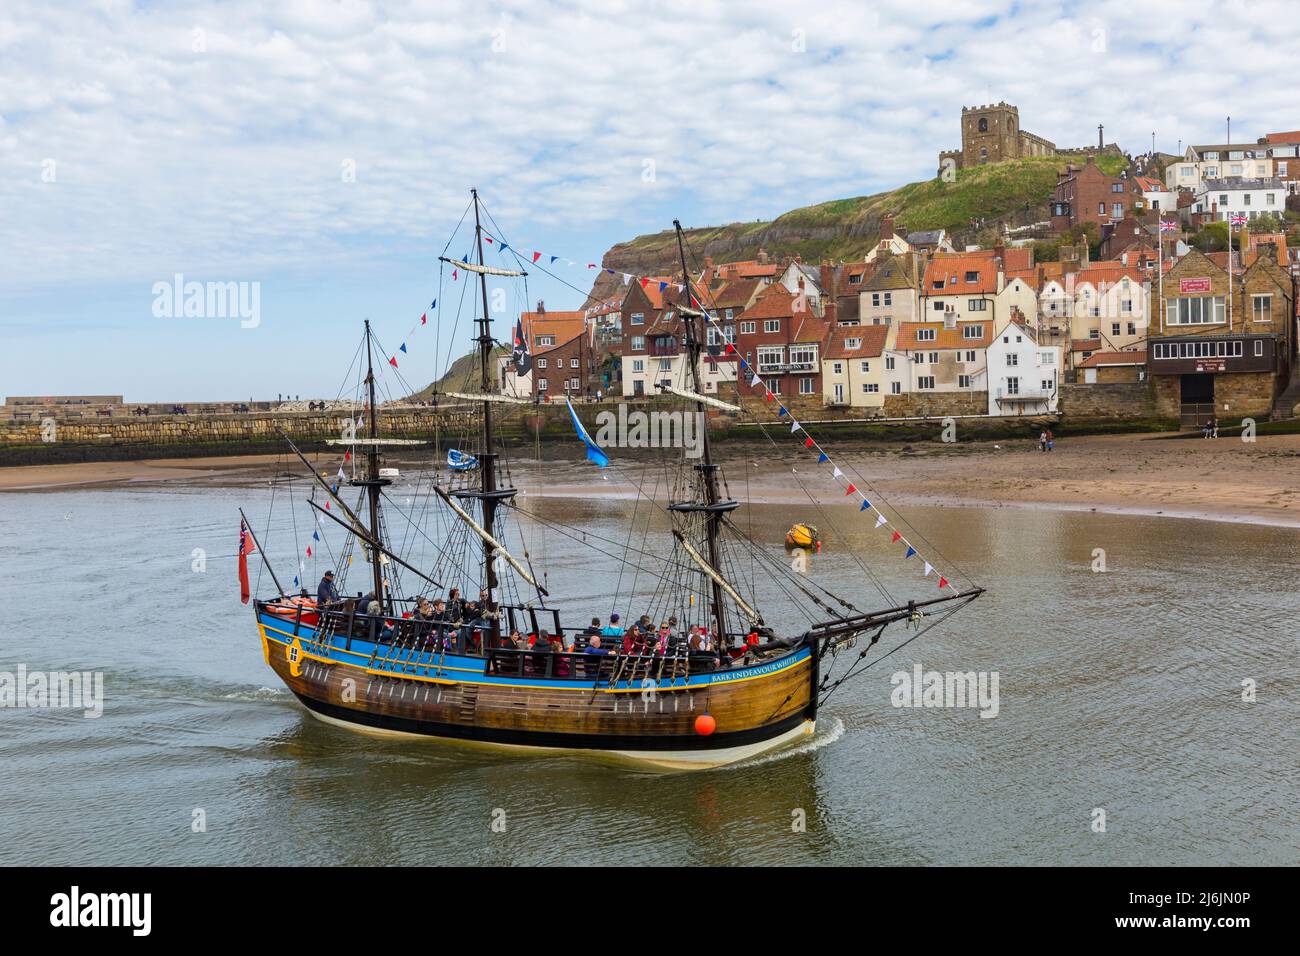 Bark Endeavour Whitby ship sailing in harbour at Whitby, Yorkshire, UK in April Stock Photo